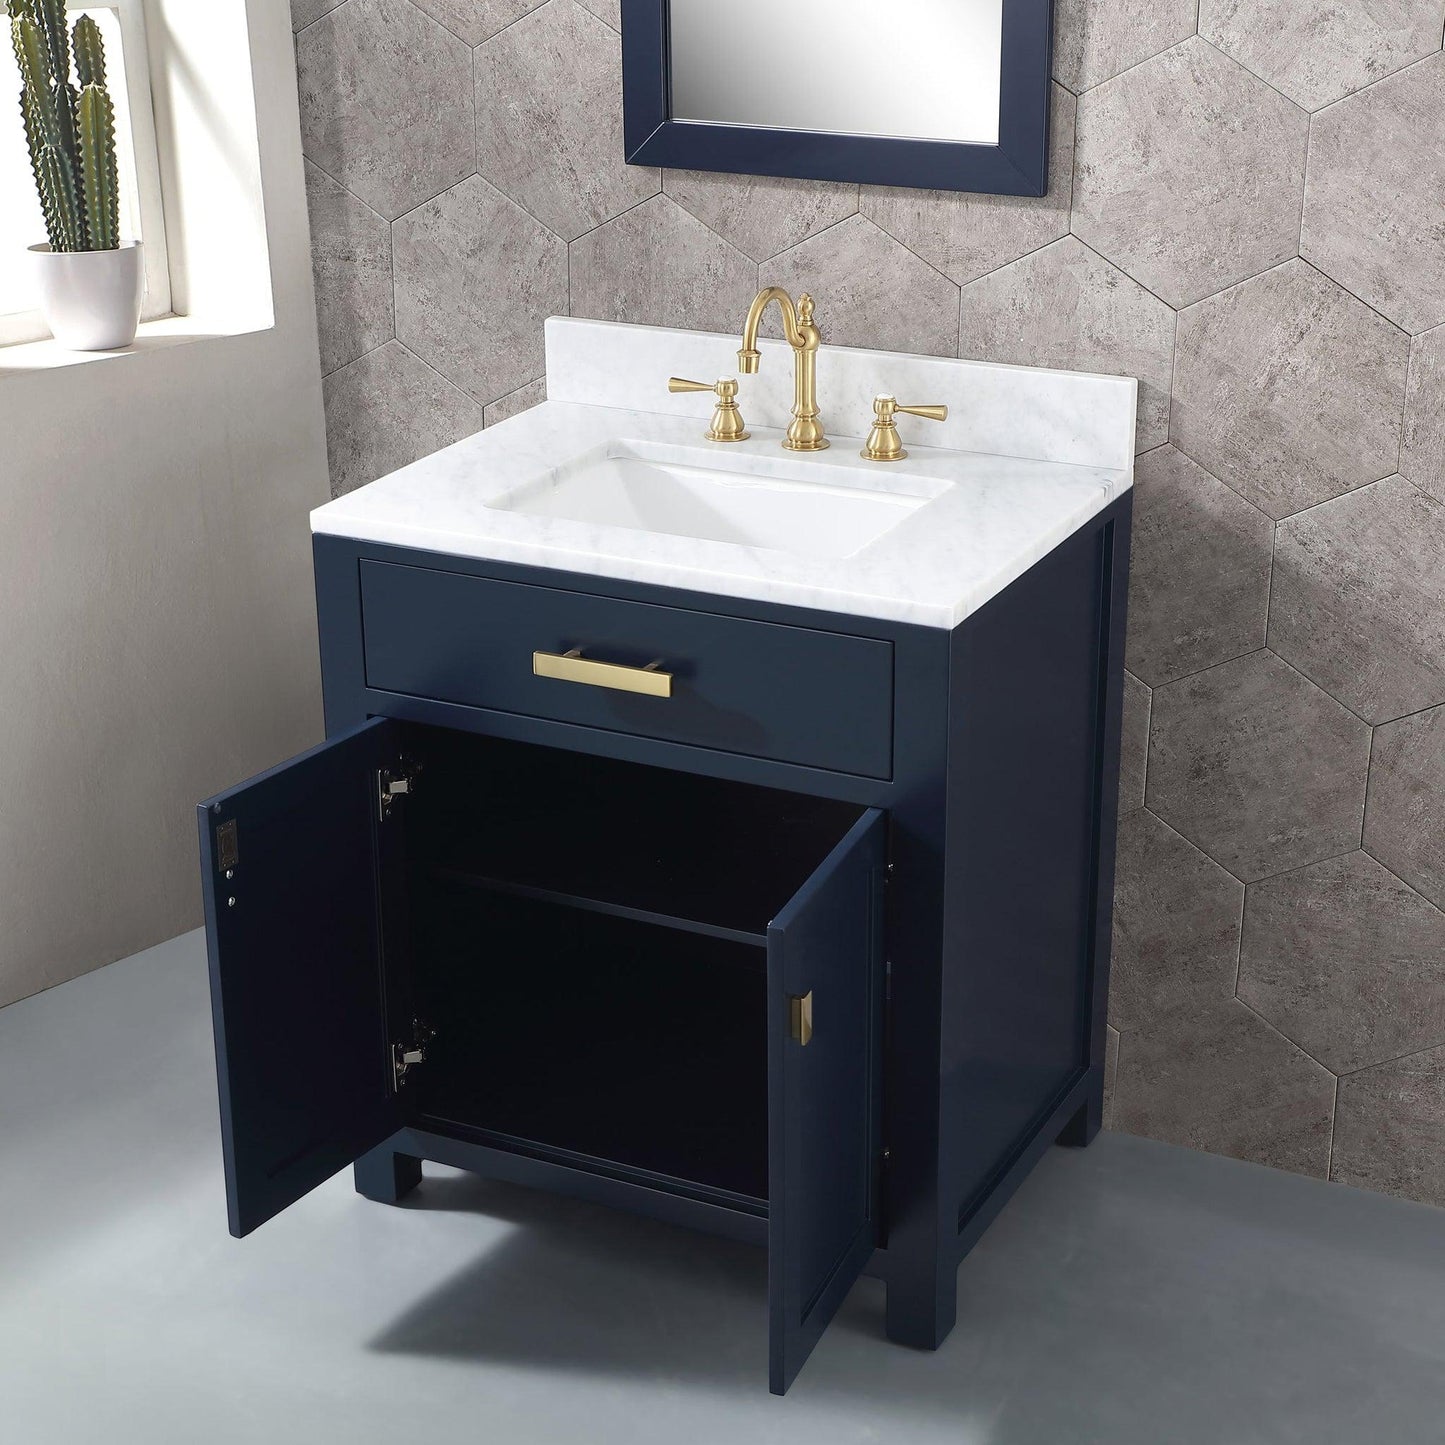 Water Creation Madison 30" Single Sink Carrara White Marble Vanity In Monarch Blue With Matching Mirror and F2-0012-06-TL Lavatory Faucet